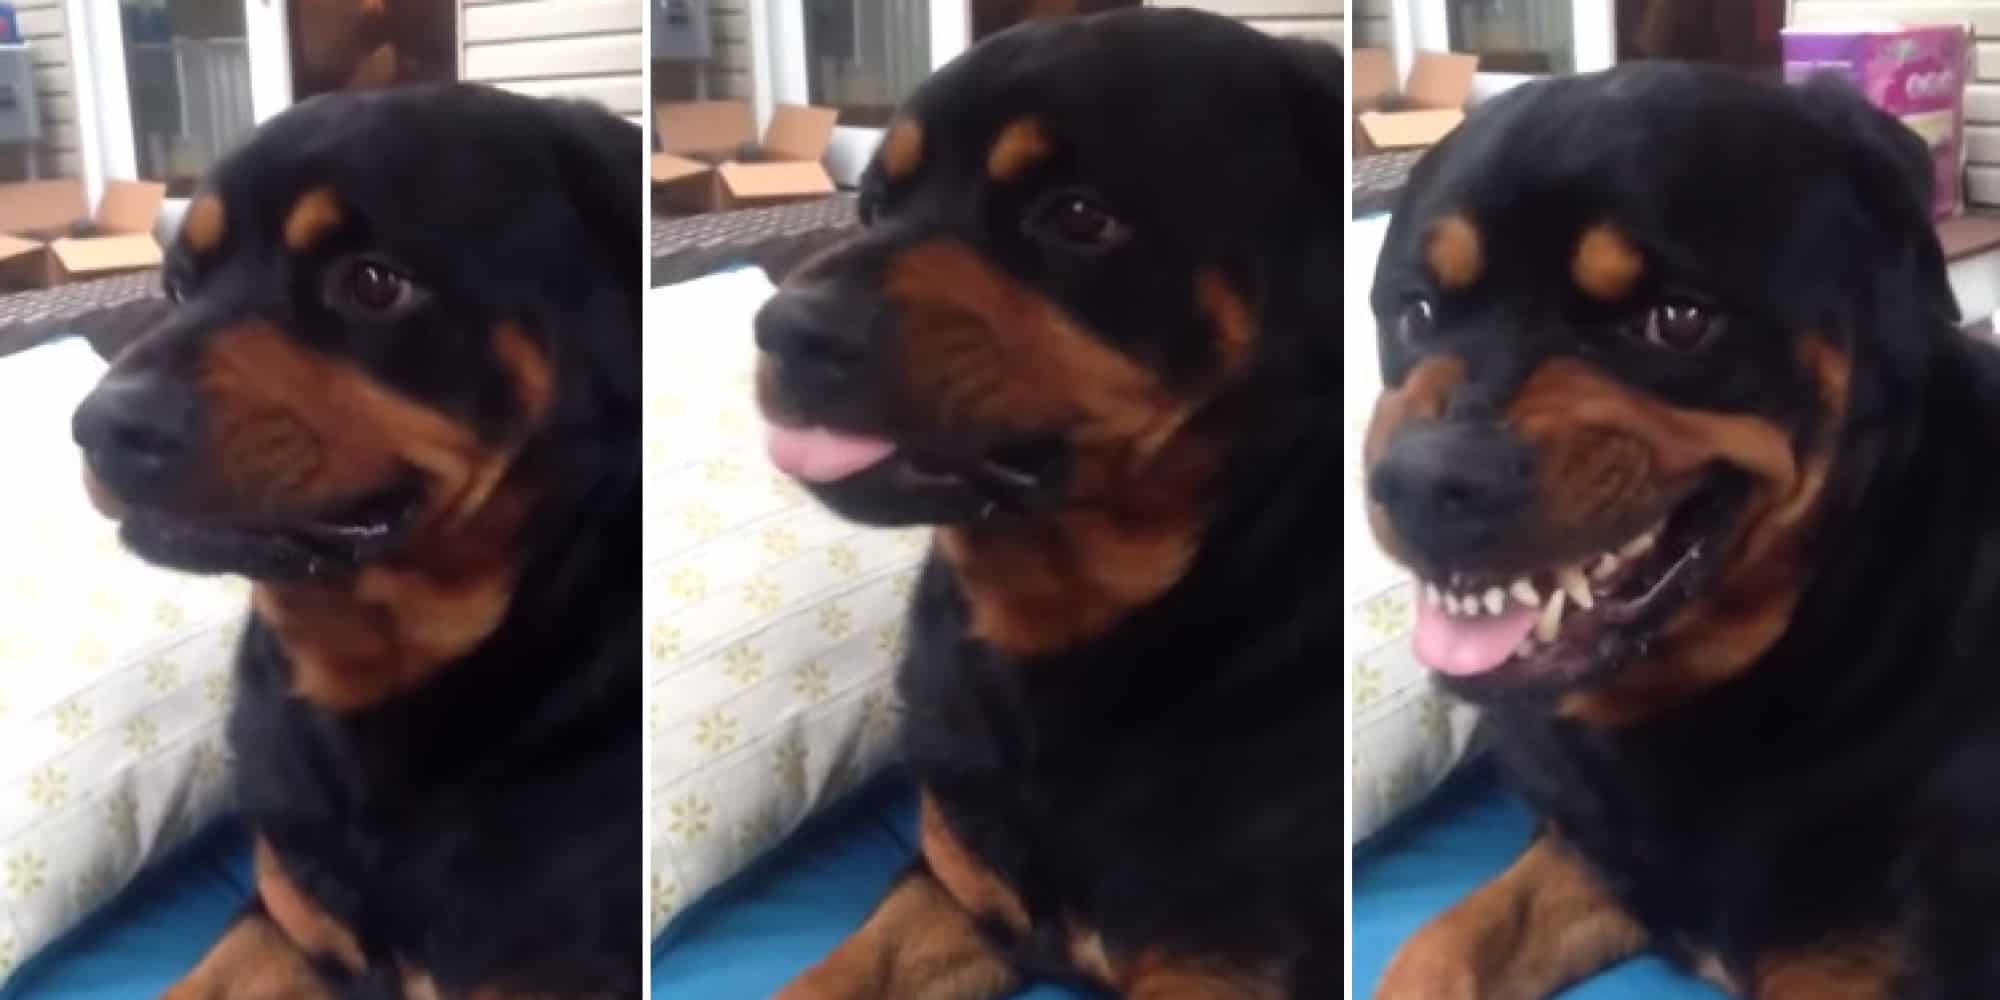 Adorable Rottweiler Puppy Shows Us His 'Mean Face'